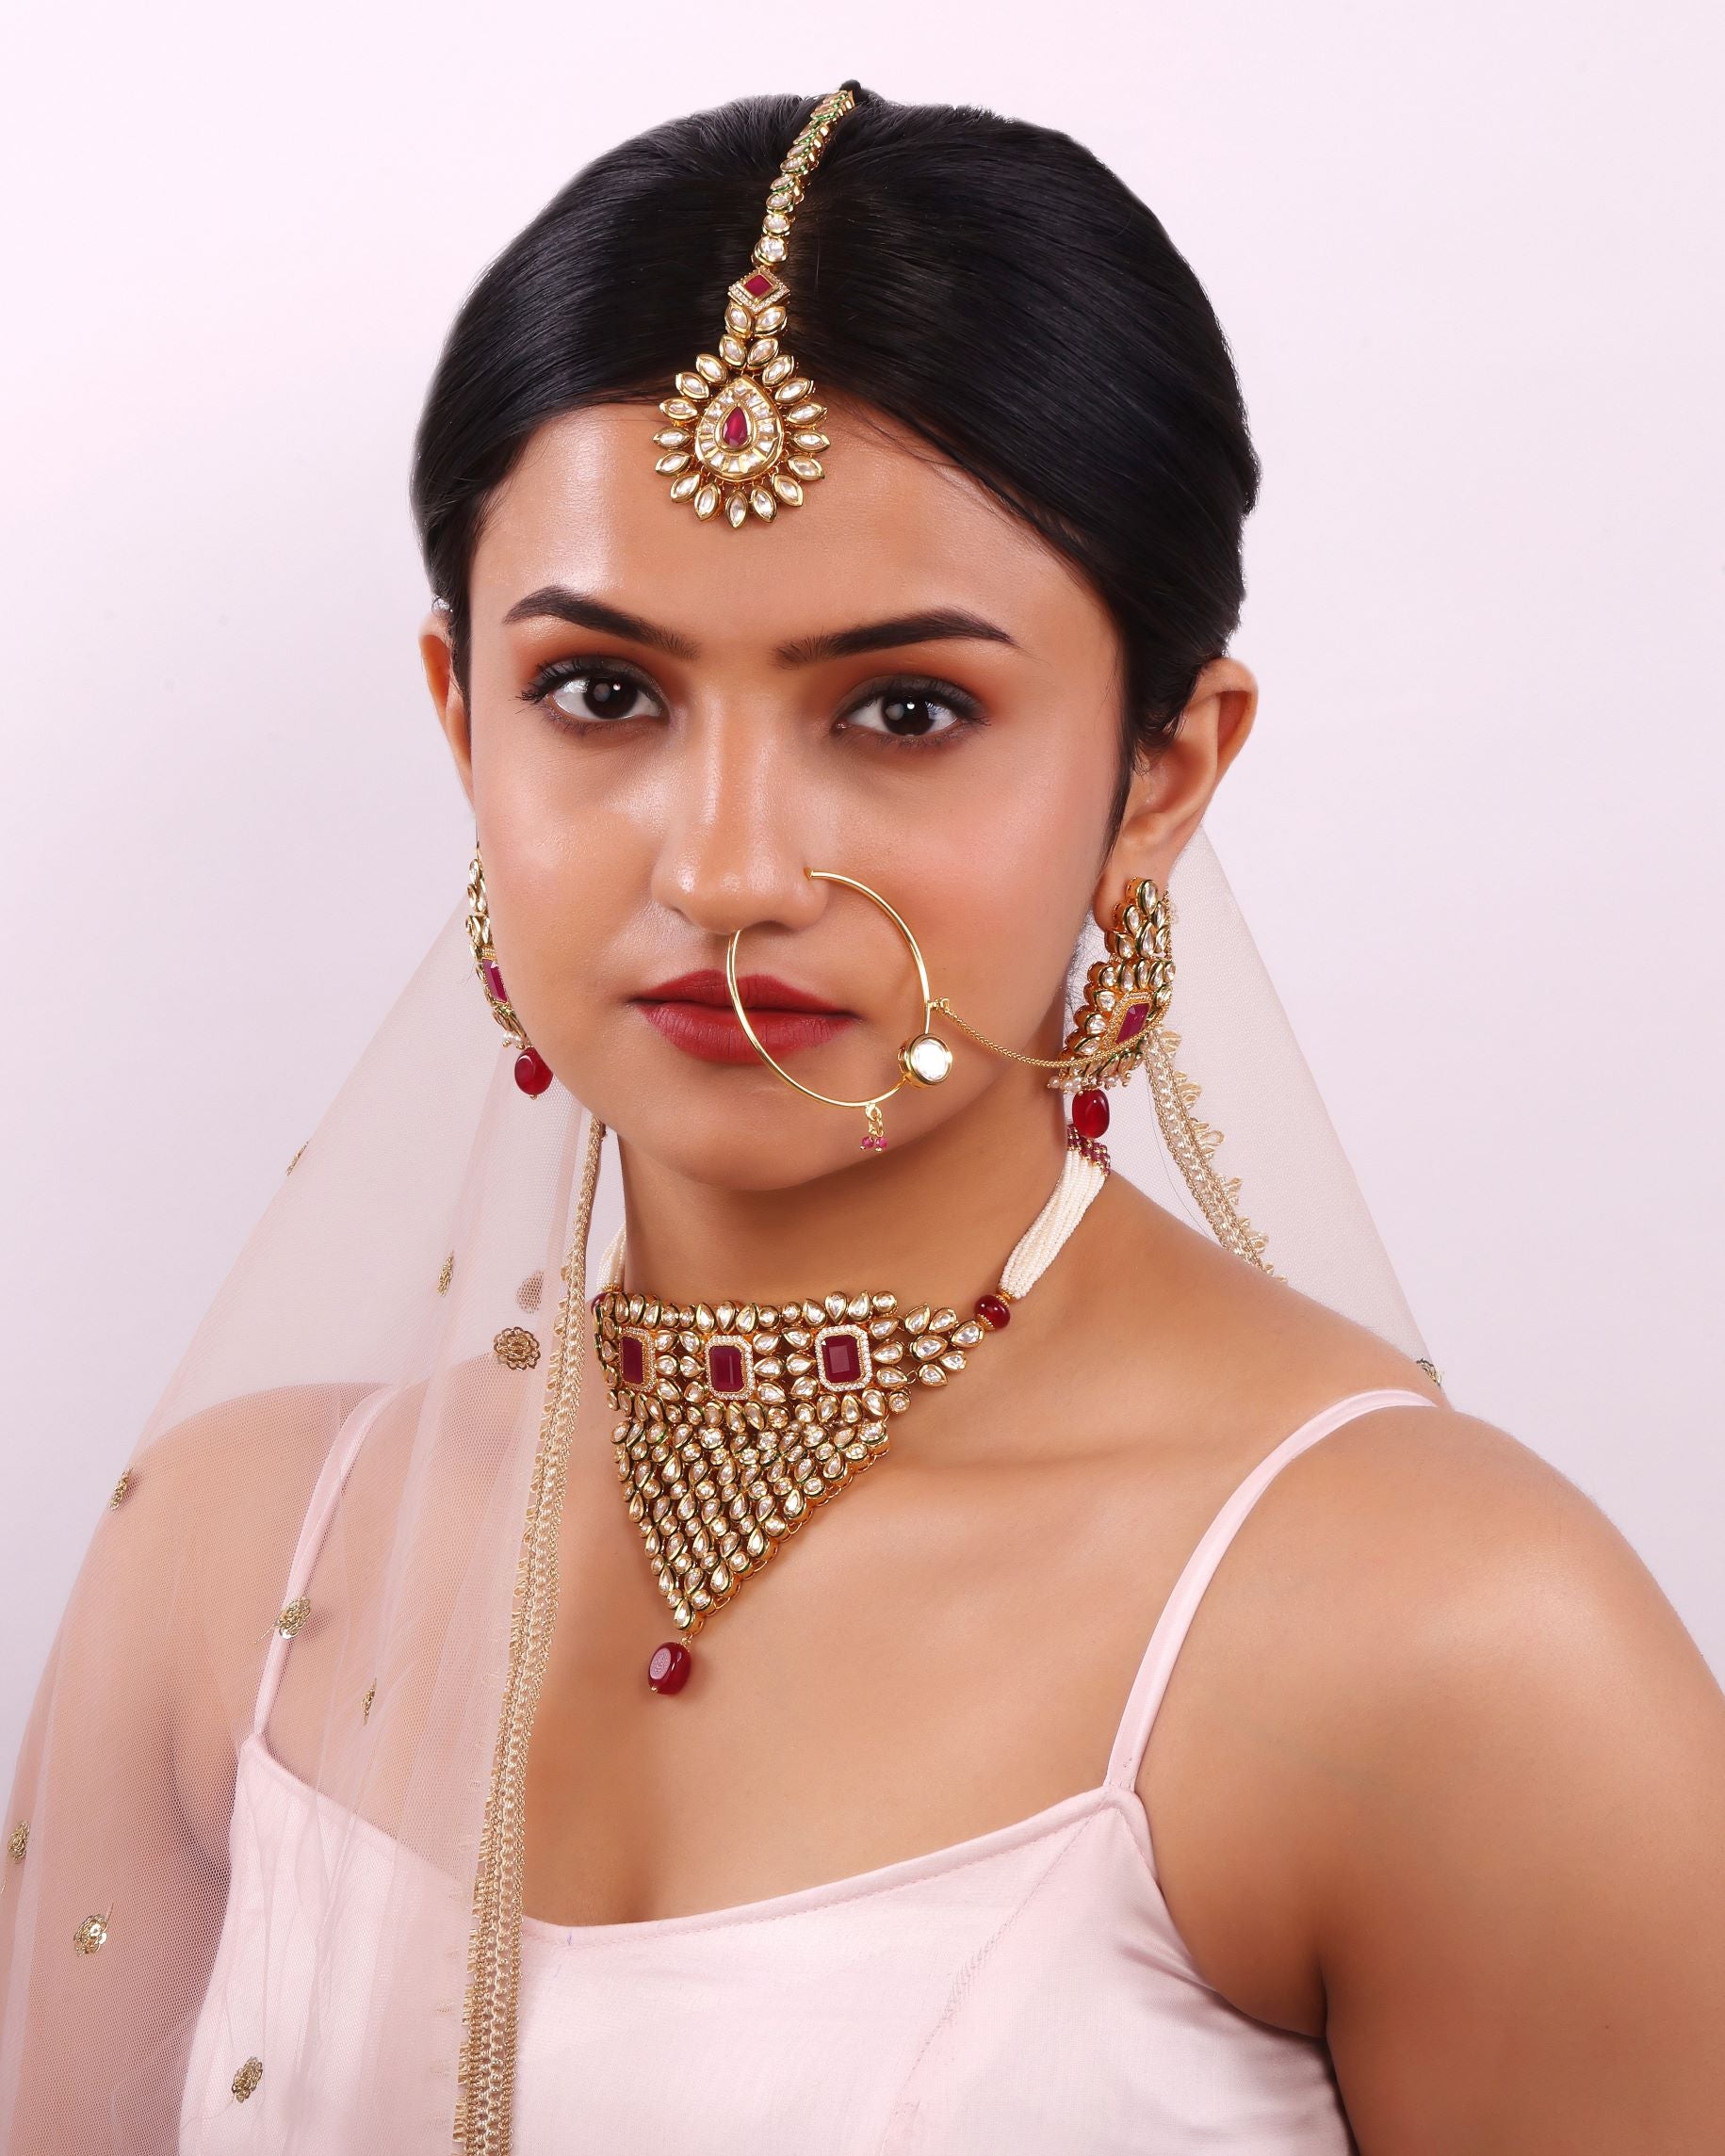 Top 10 must have Bridal Kundan Jewellery on your wedding day